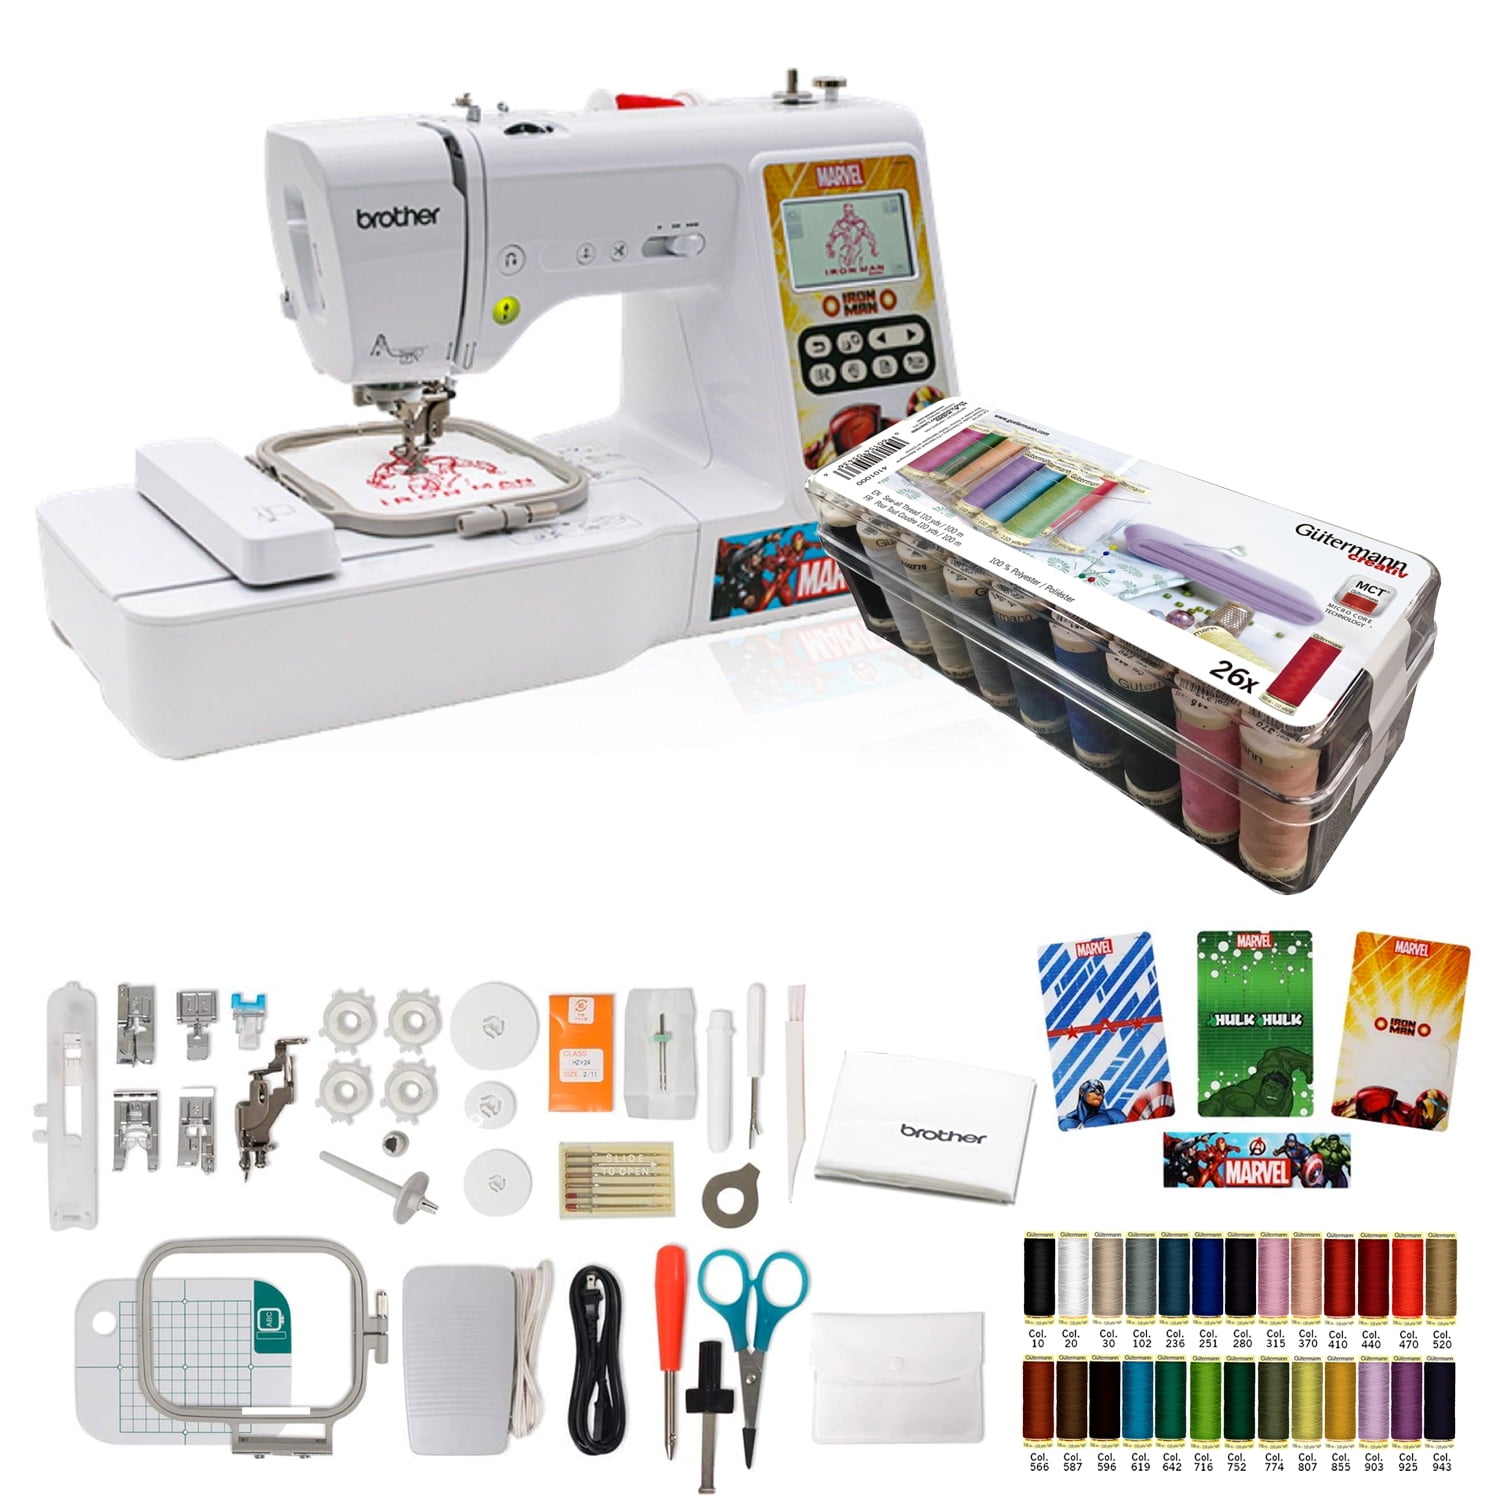 Brother Sewing Embroidery LB5000 machine - arts & crafts - by